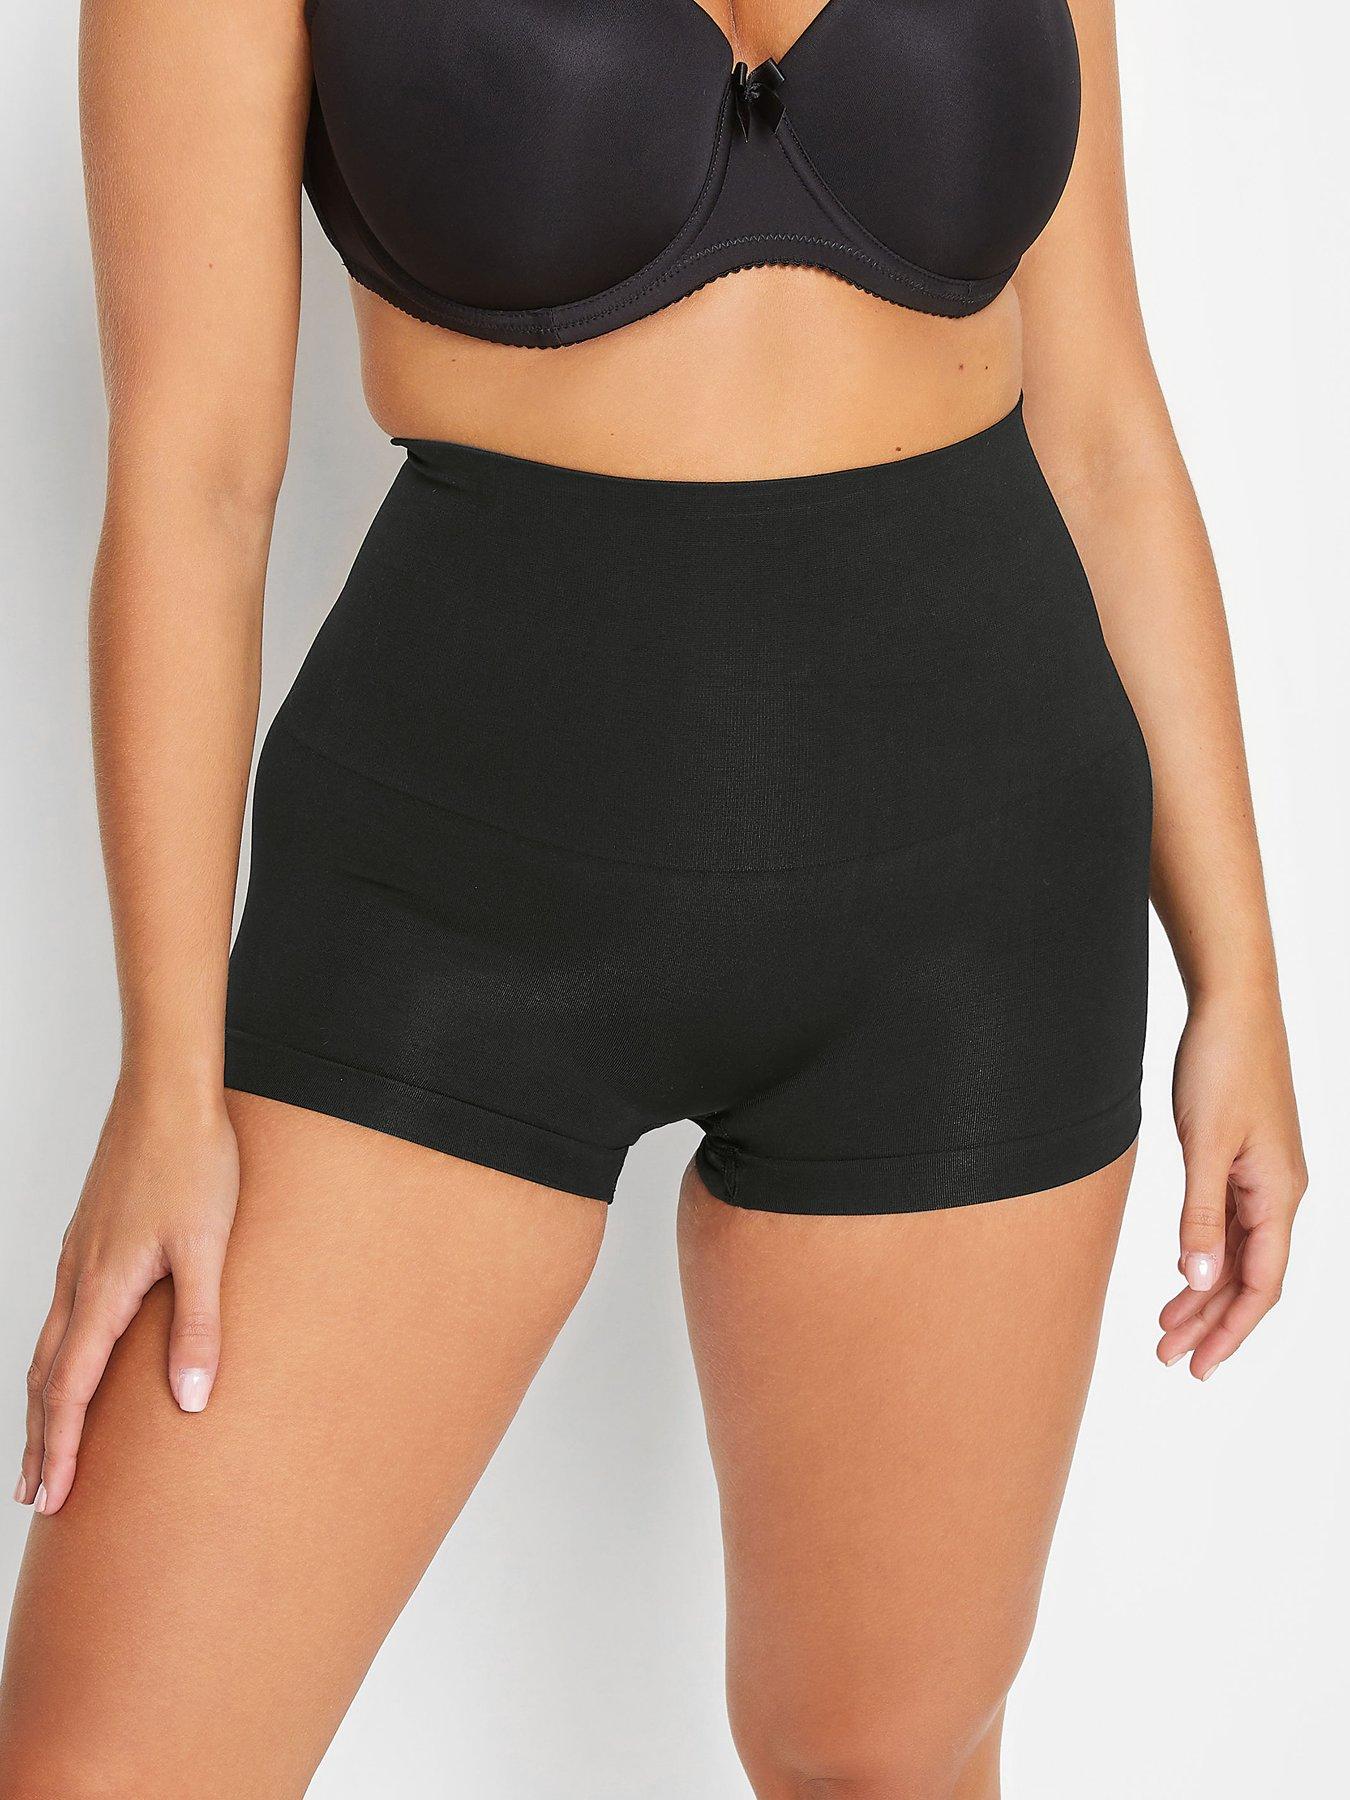 Spanx Women's Pull-on Power Series Shaping Short Set Solid Black Small Size